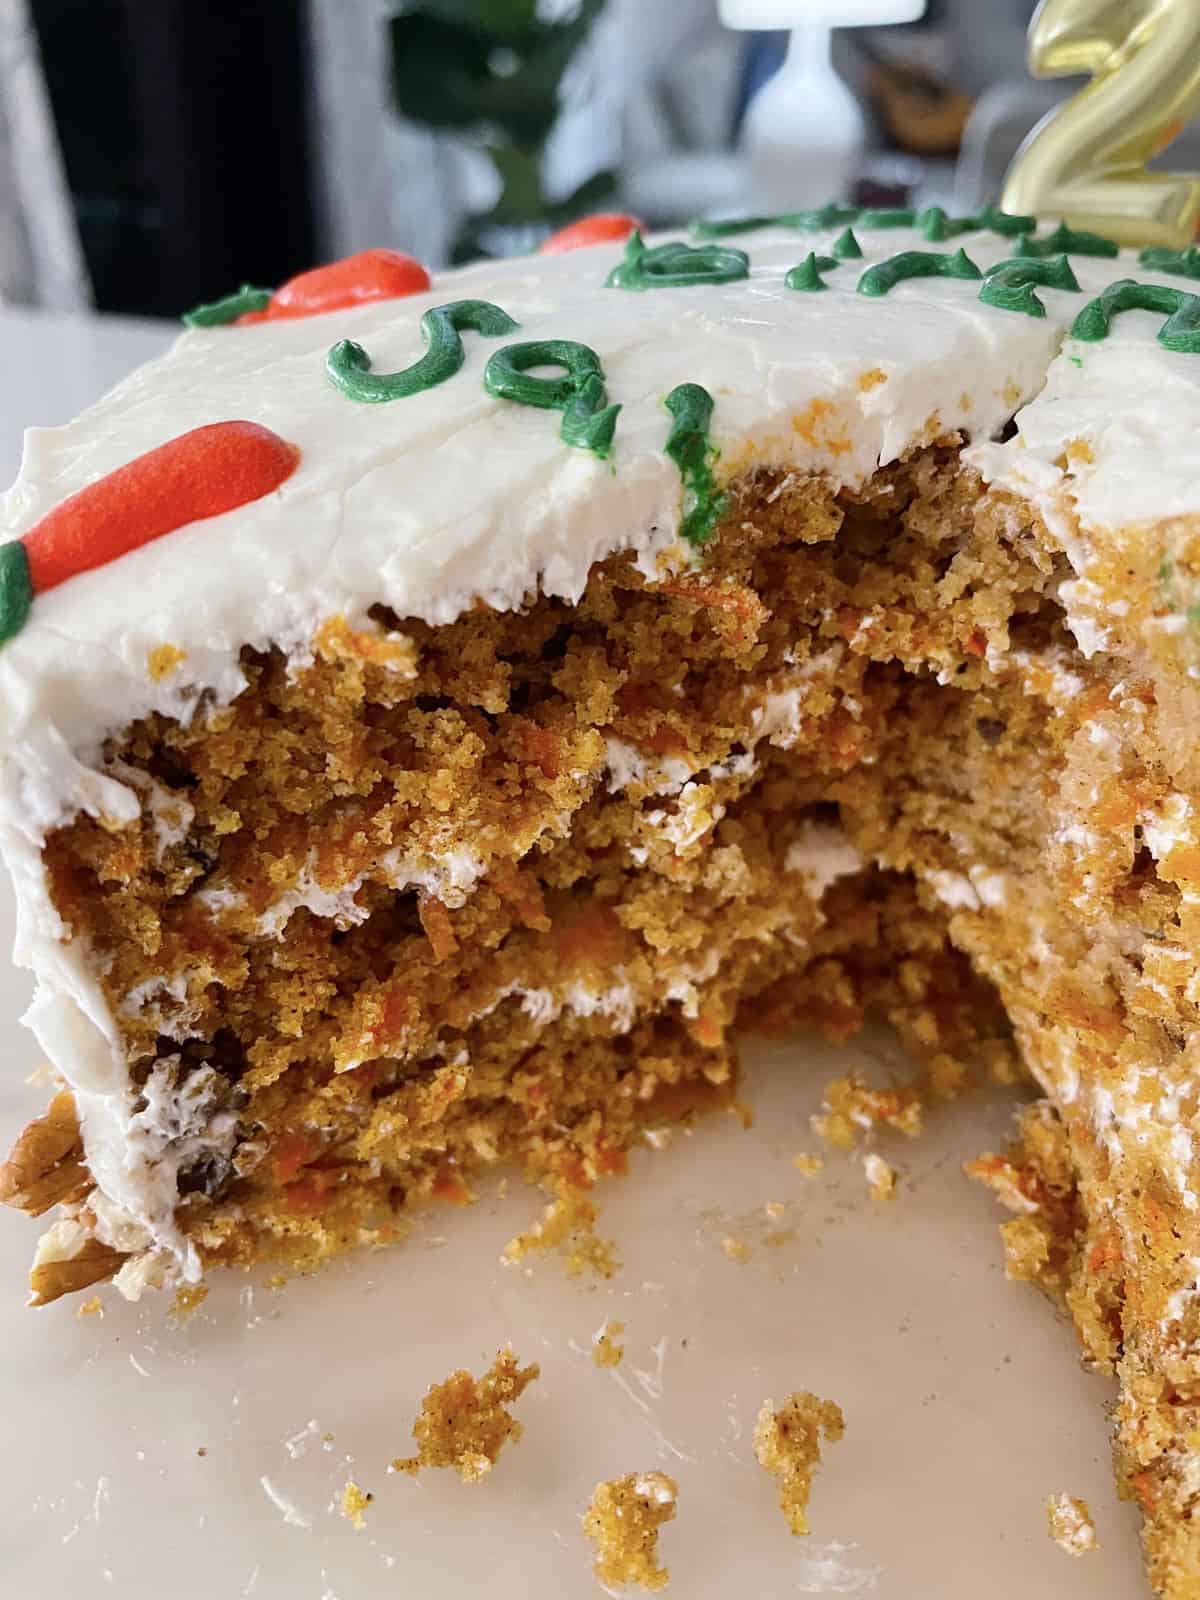 The best ever carrot cake recipe.